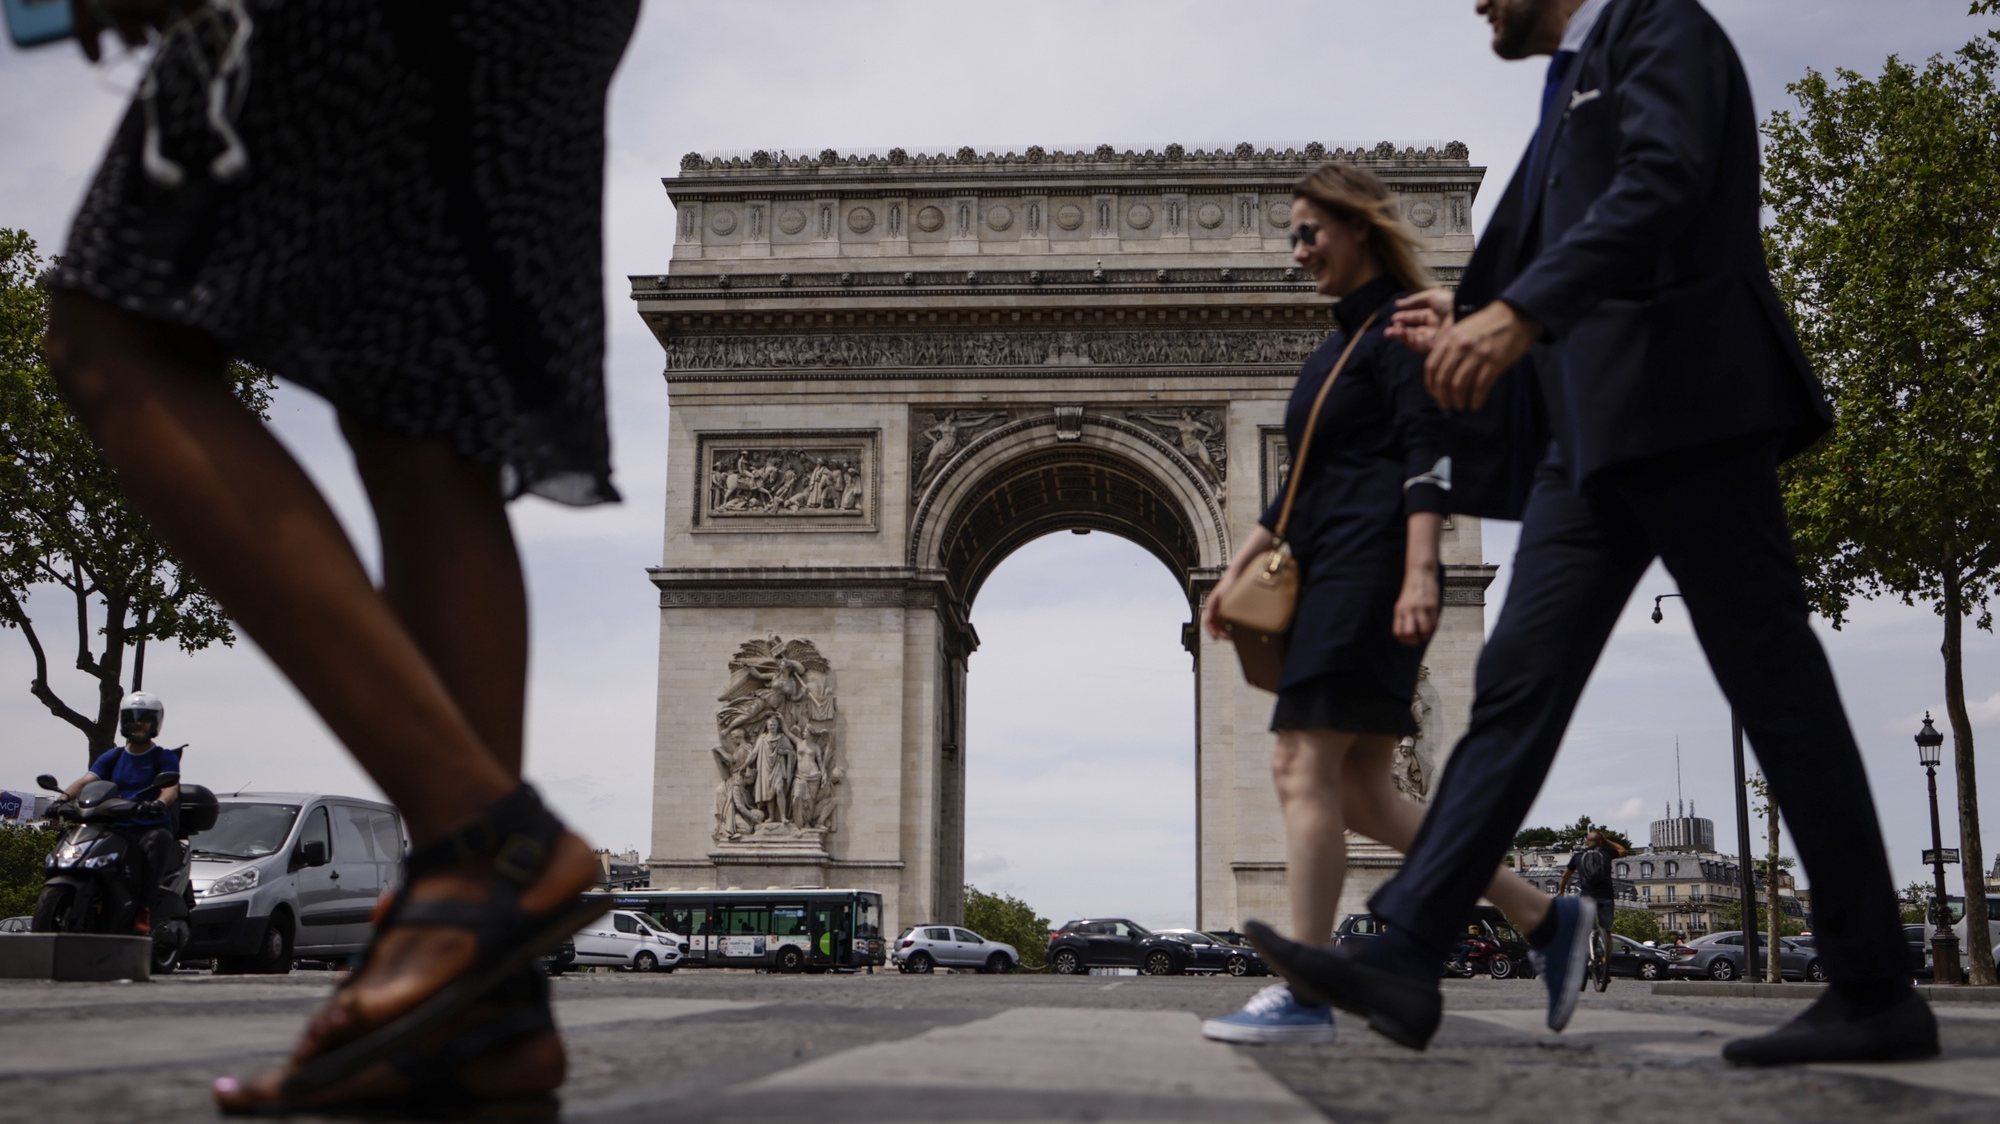 epa09279479 People not wearing protective face masks walk past the Arc of Triomphe in Paris, France, 17 June 2021. France eases some of its coronavirus disease (COVID-19) restrictions starting on 17 June, allowing not to wear a face mask in the streets.  EPA/YOAN VALAT